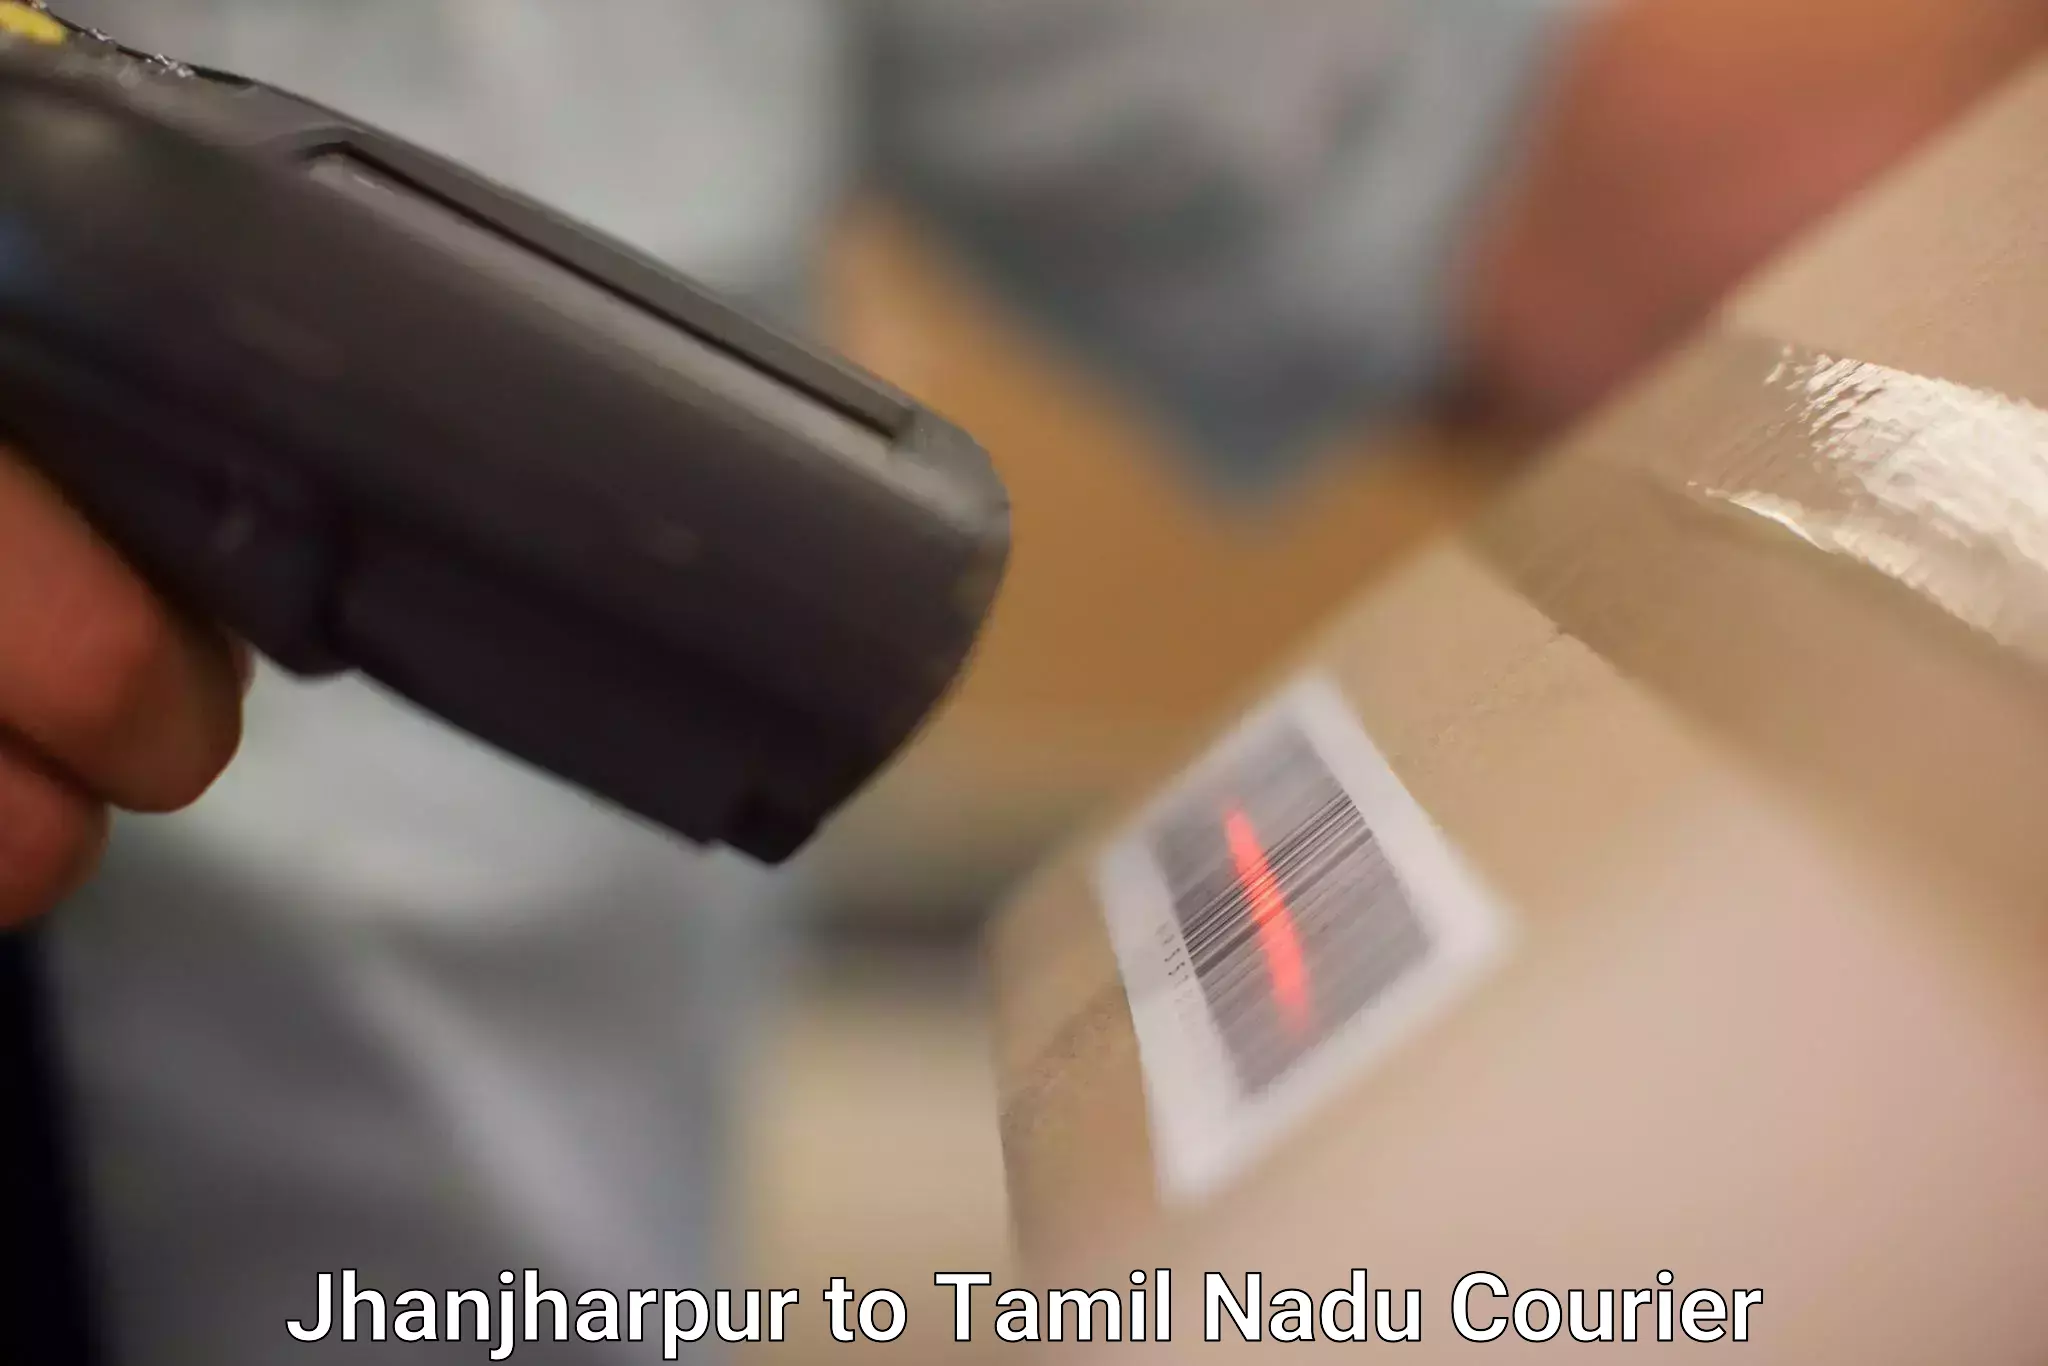 Courier dispatch services in Jhanjharpur to Tiruchengode